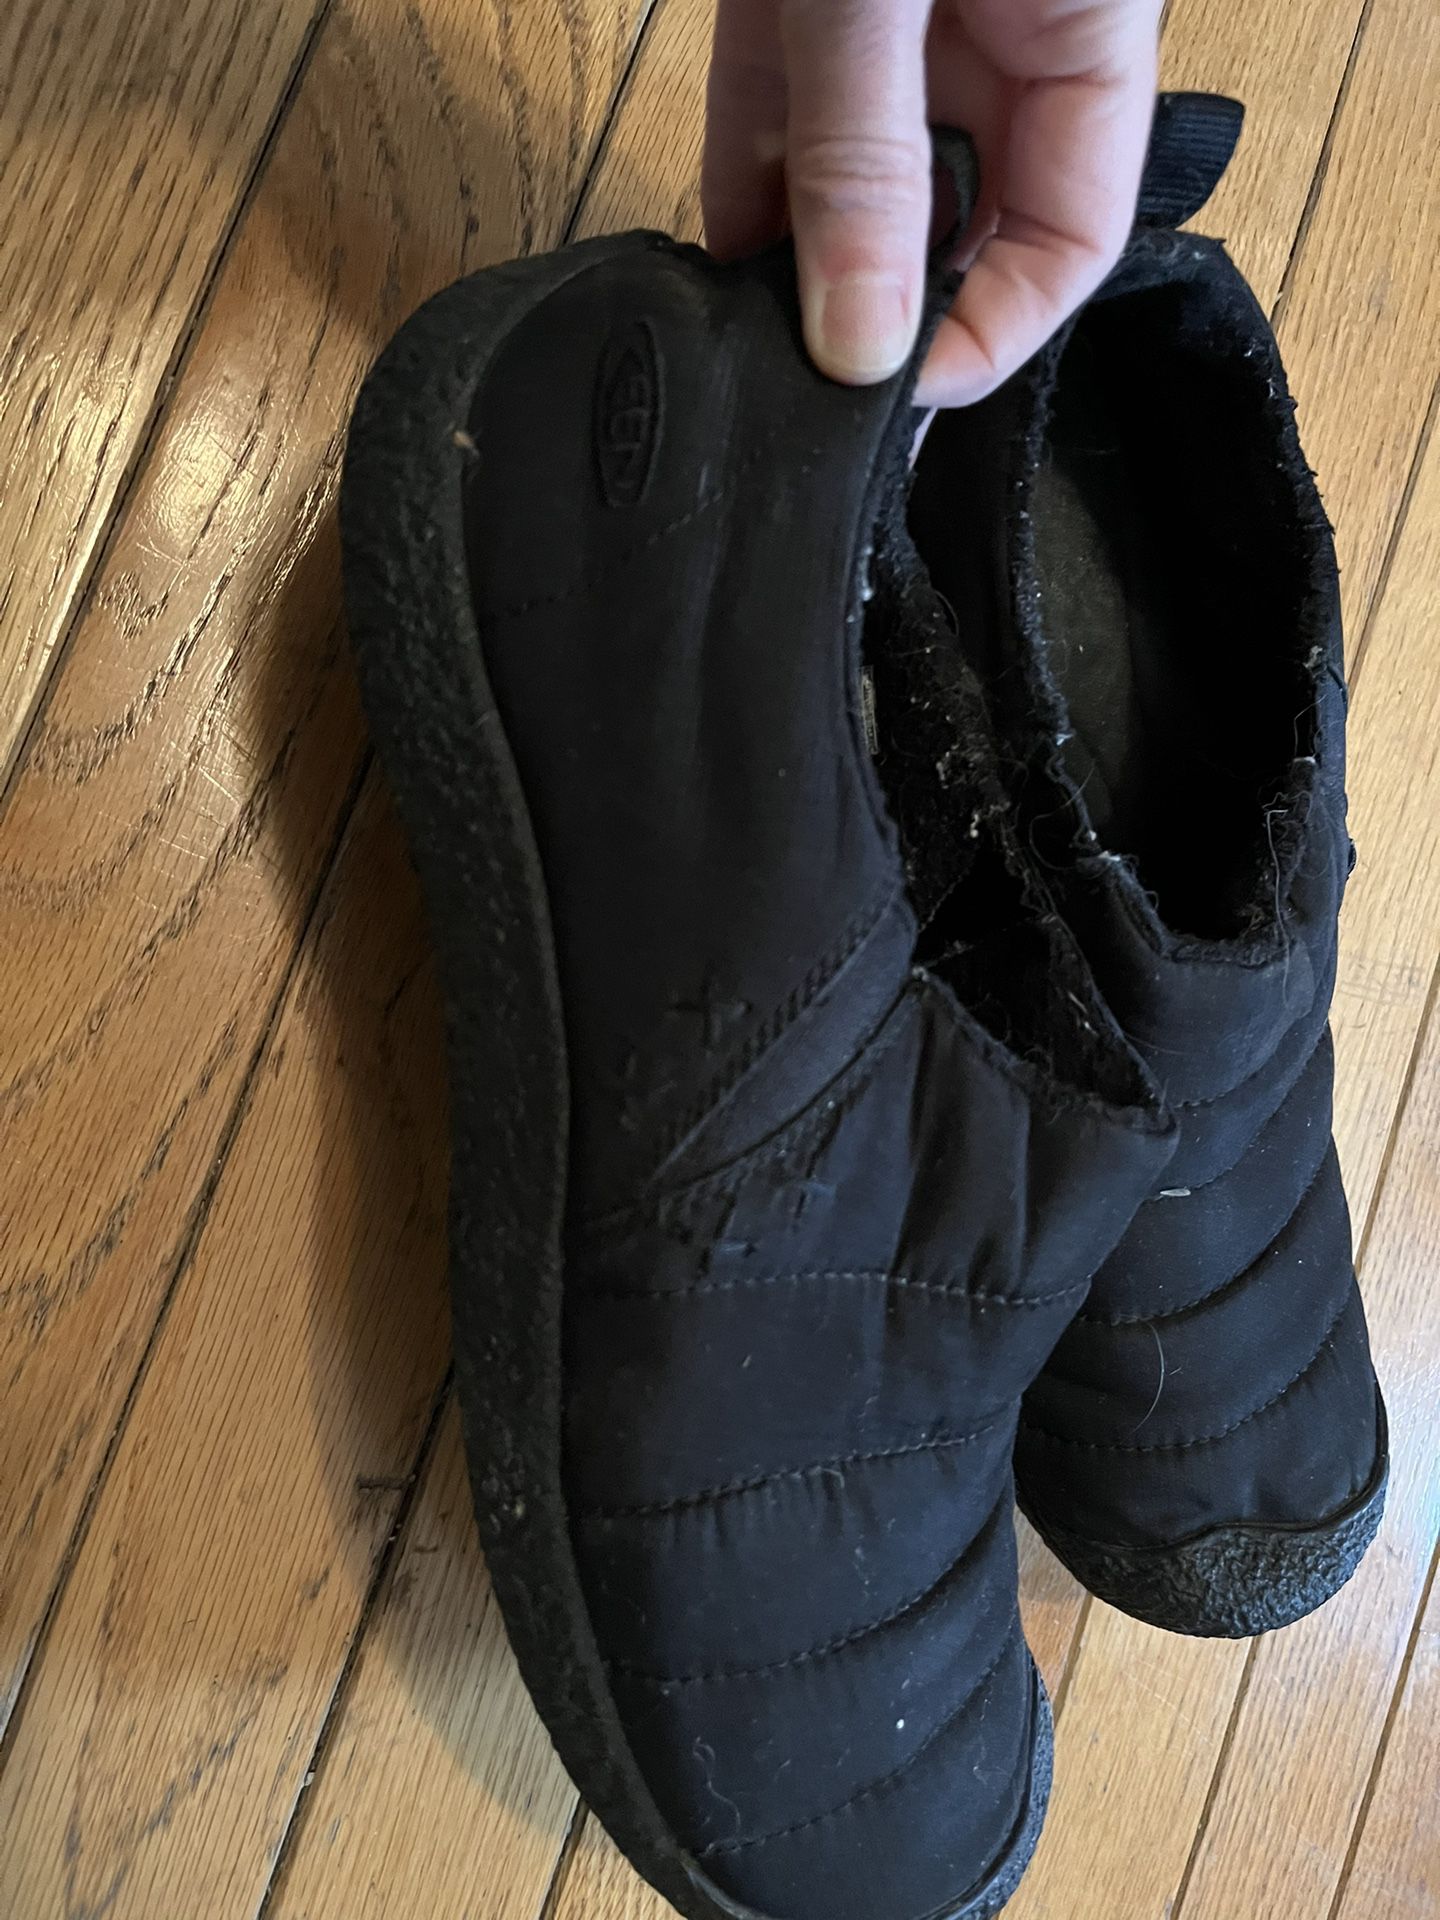 size 11 black keen shoes